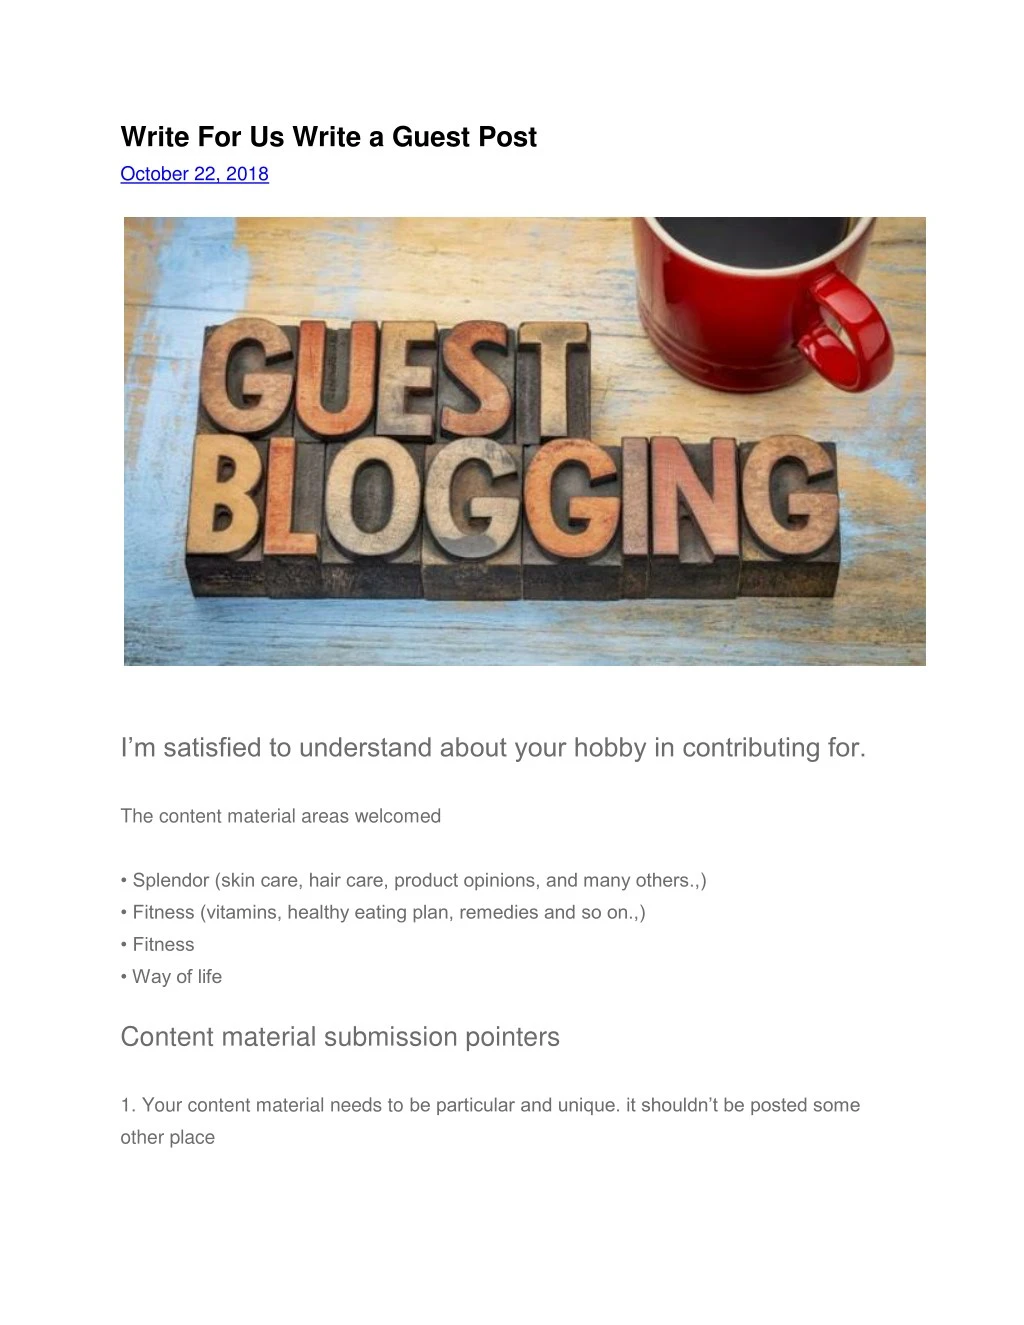 write for us write a guest post october 22 2018